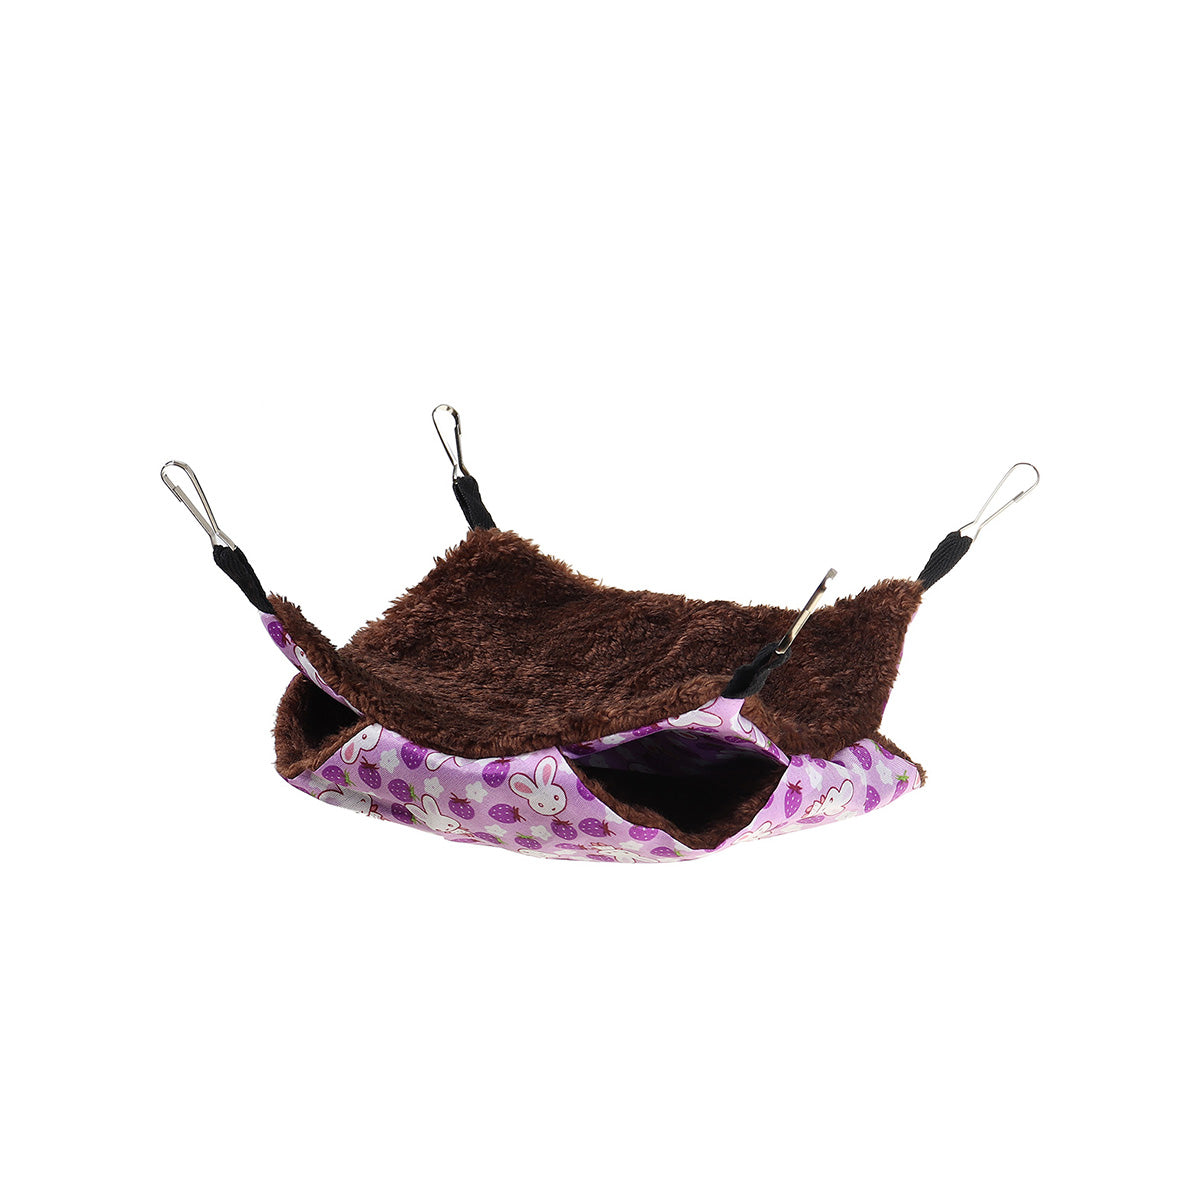 Pet Hammock Double-Layer Plush Fleece Soft Hanging Nest Sleeping Bed for Pet Home Decoration